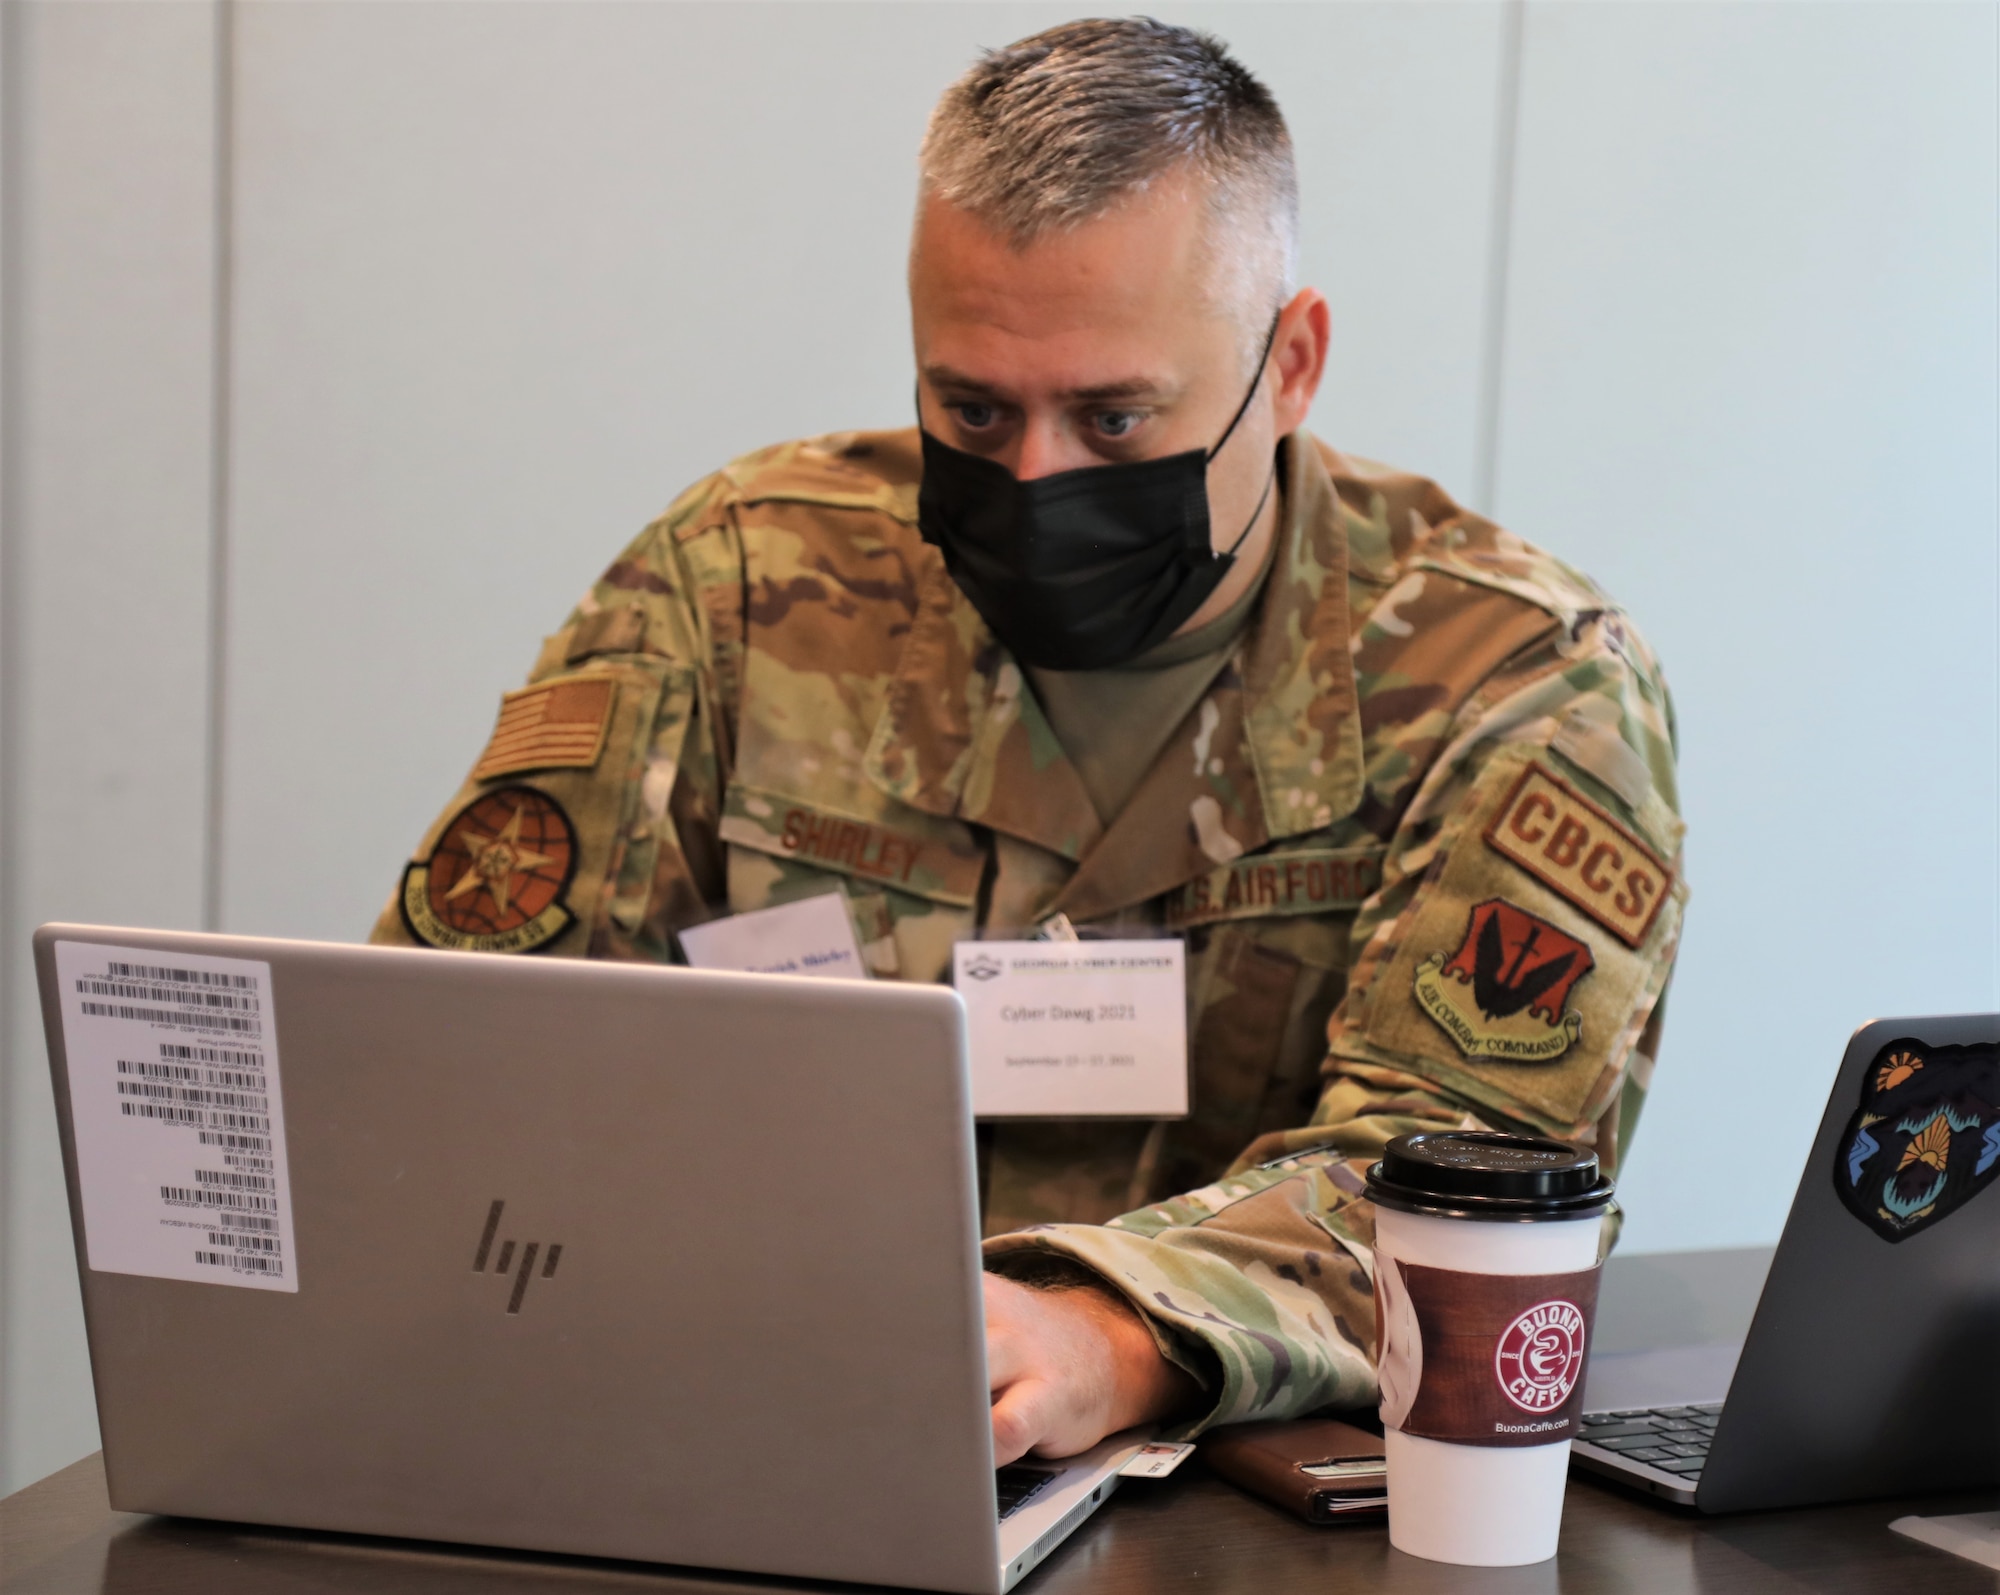 U.S. Air Force Master Sgt. Patrick Shirley, a cybersecurity noncommissioned officer with the 283rd Combat Communications Squadron, 116th Air Control Wing, Georgia Air National Guard, monitors cyber activity during exercise Cyber Dawg 21 Sept. 14, 2021, at the Georgia Cyber Center in Augusta, Georgia. Cyber Dawg 21 participants learned how to expose and correct weaknesses in cyber operations policies and procedures.